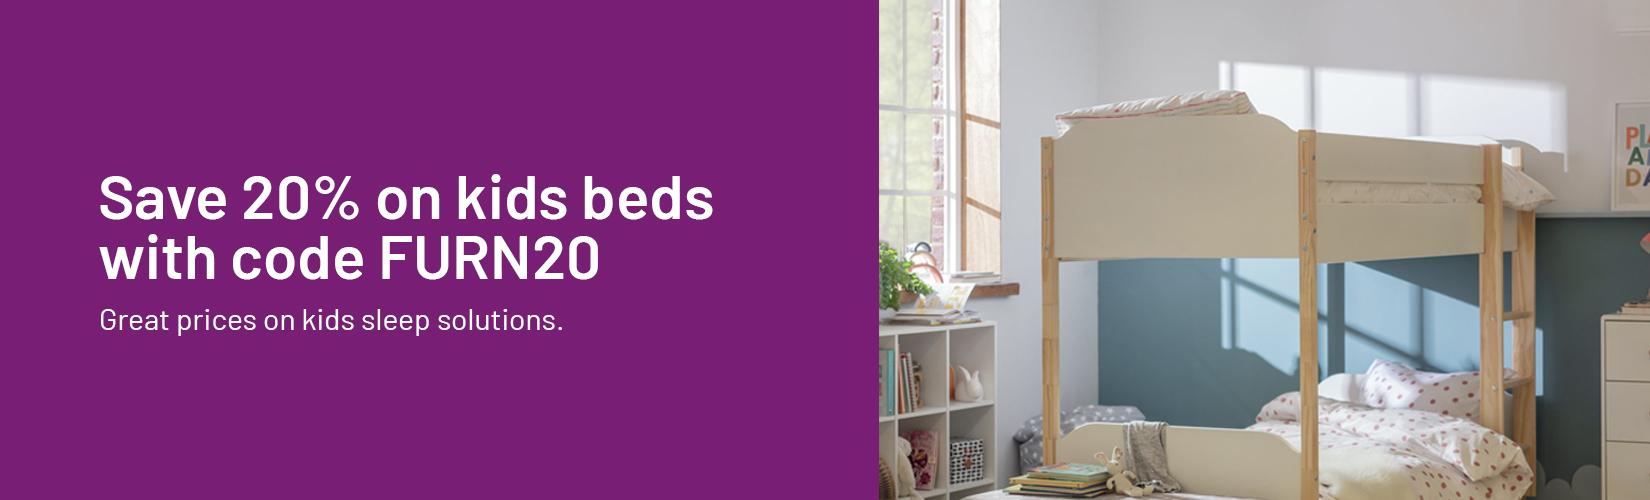 Save 20% on kids beds with code FURN20.